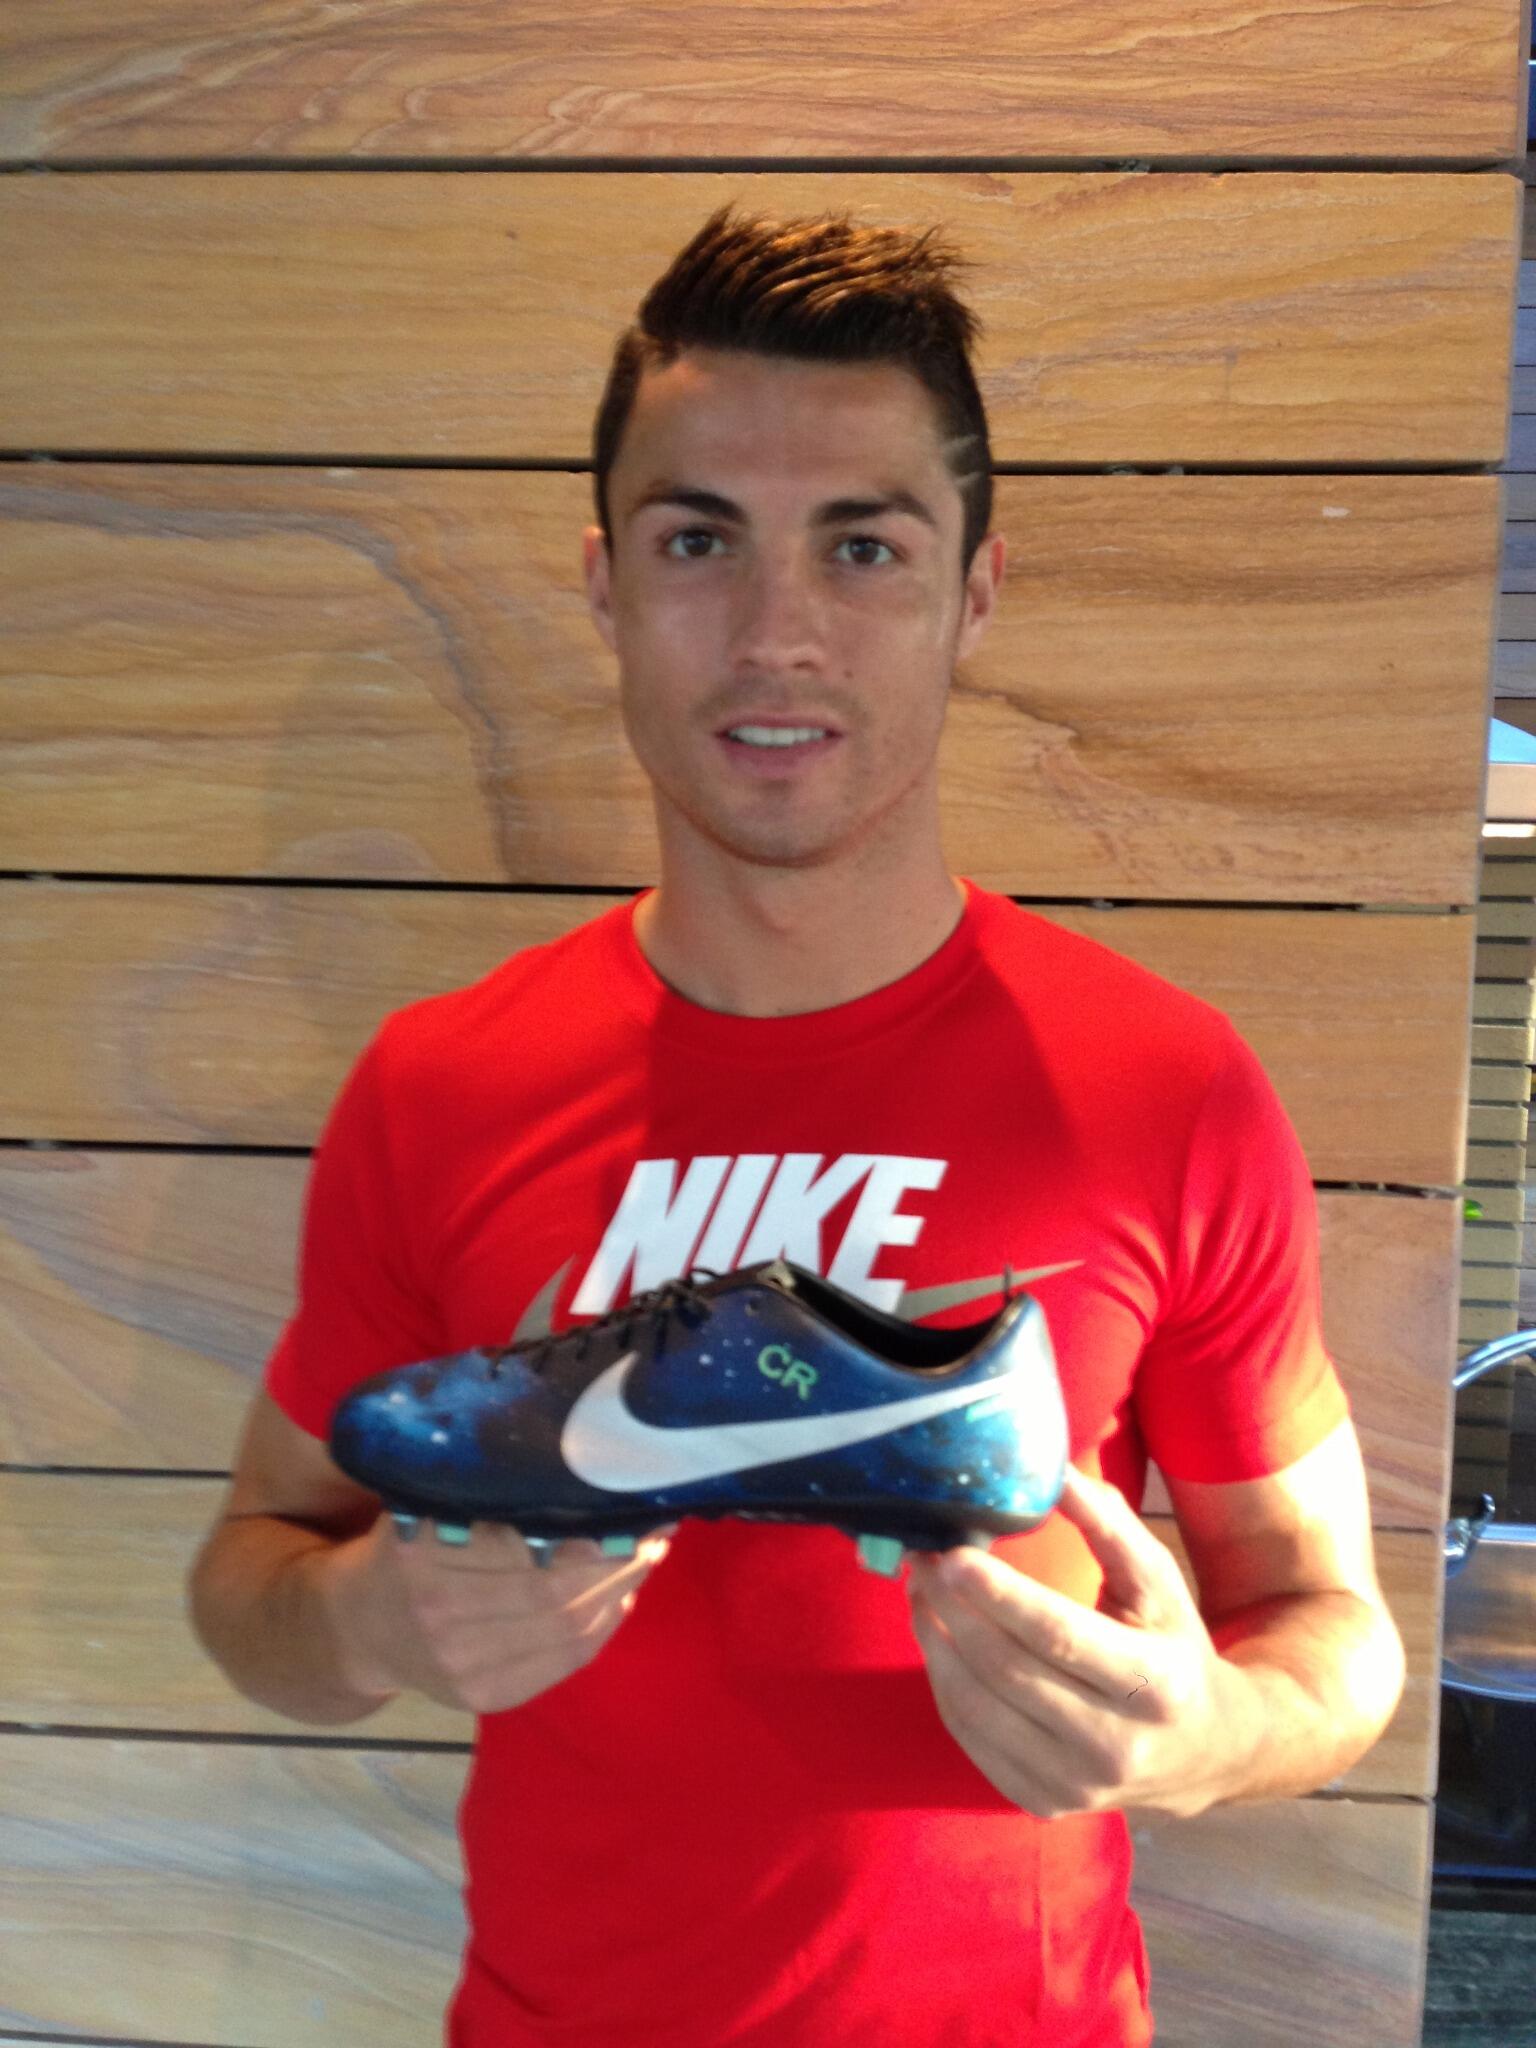 Cristiano Ronaldo on Twitter: "My new boots from - do think? http://t.co/VWxGRPNX37" / Twitter